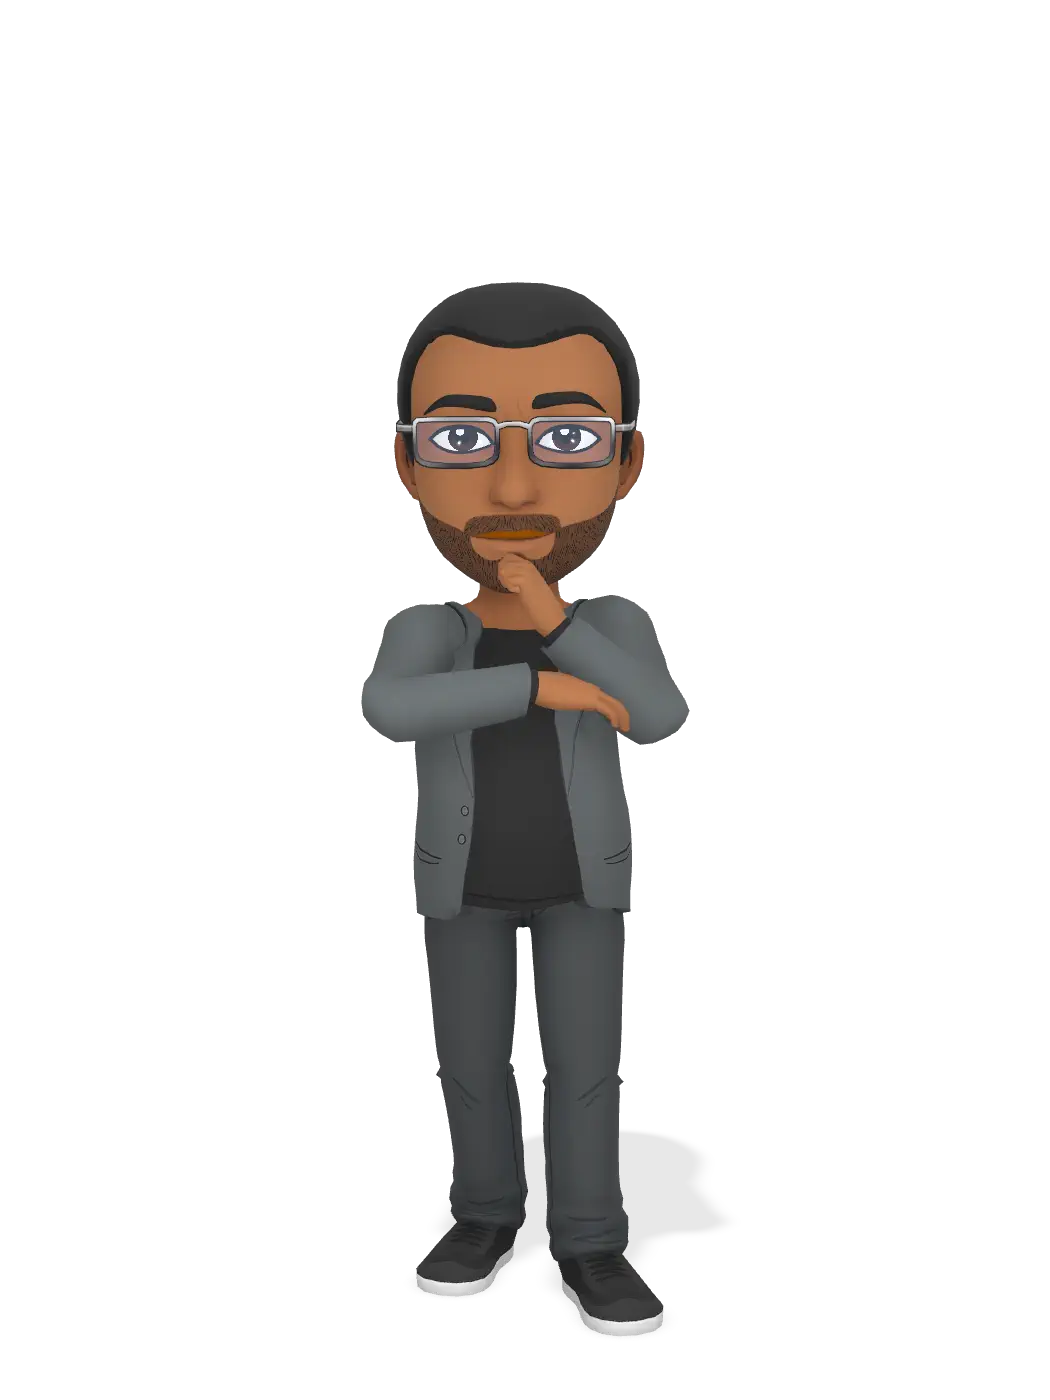 3D Bitmoji for wbyitherapy